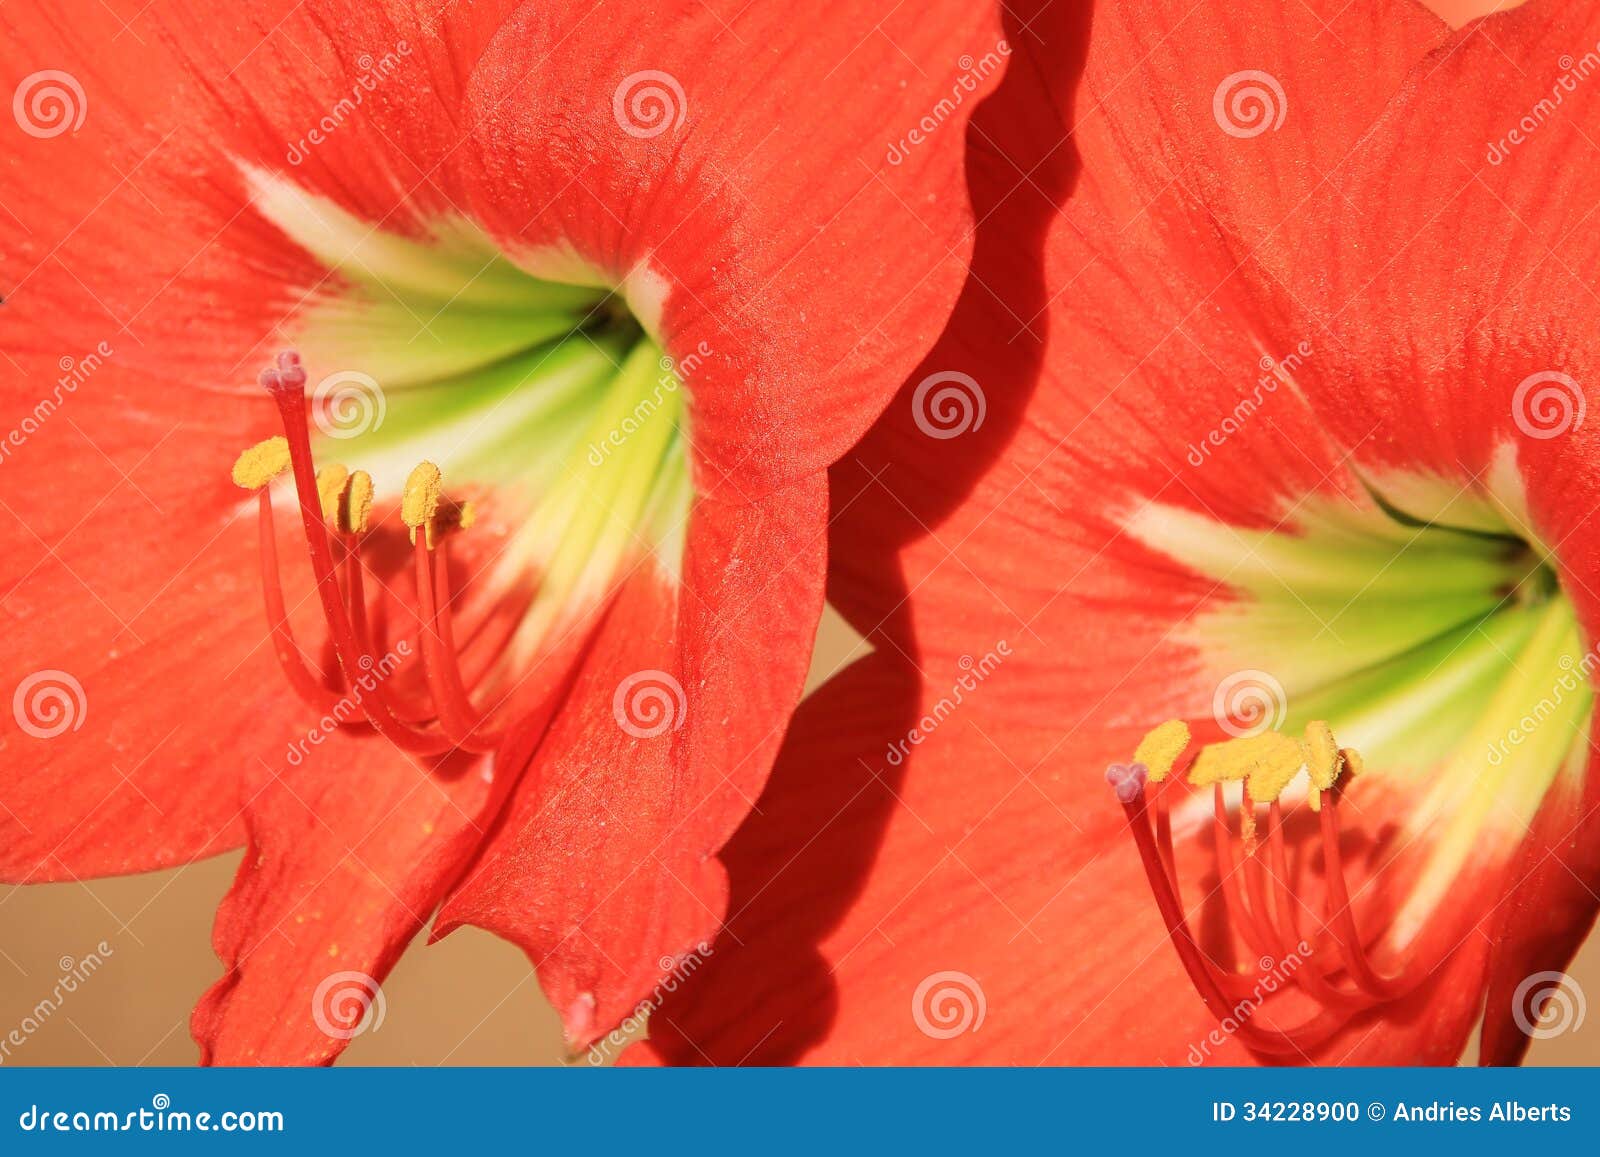 amarilla - colorful flower background - red for romance